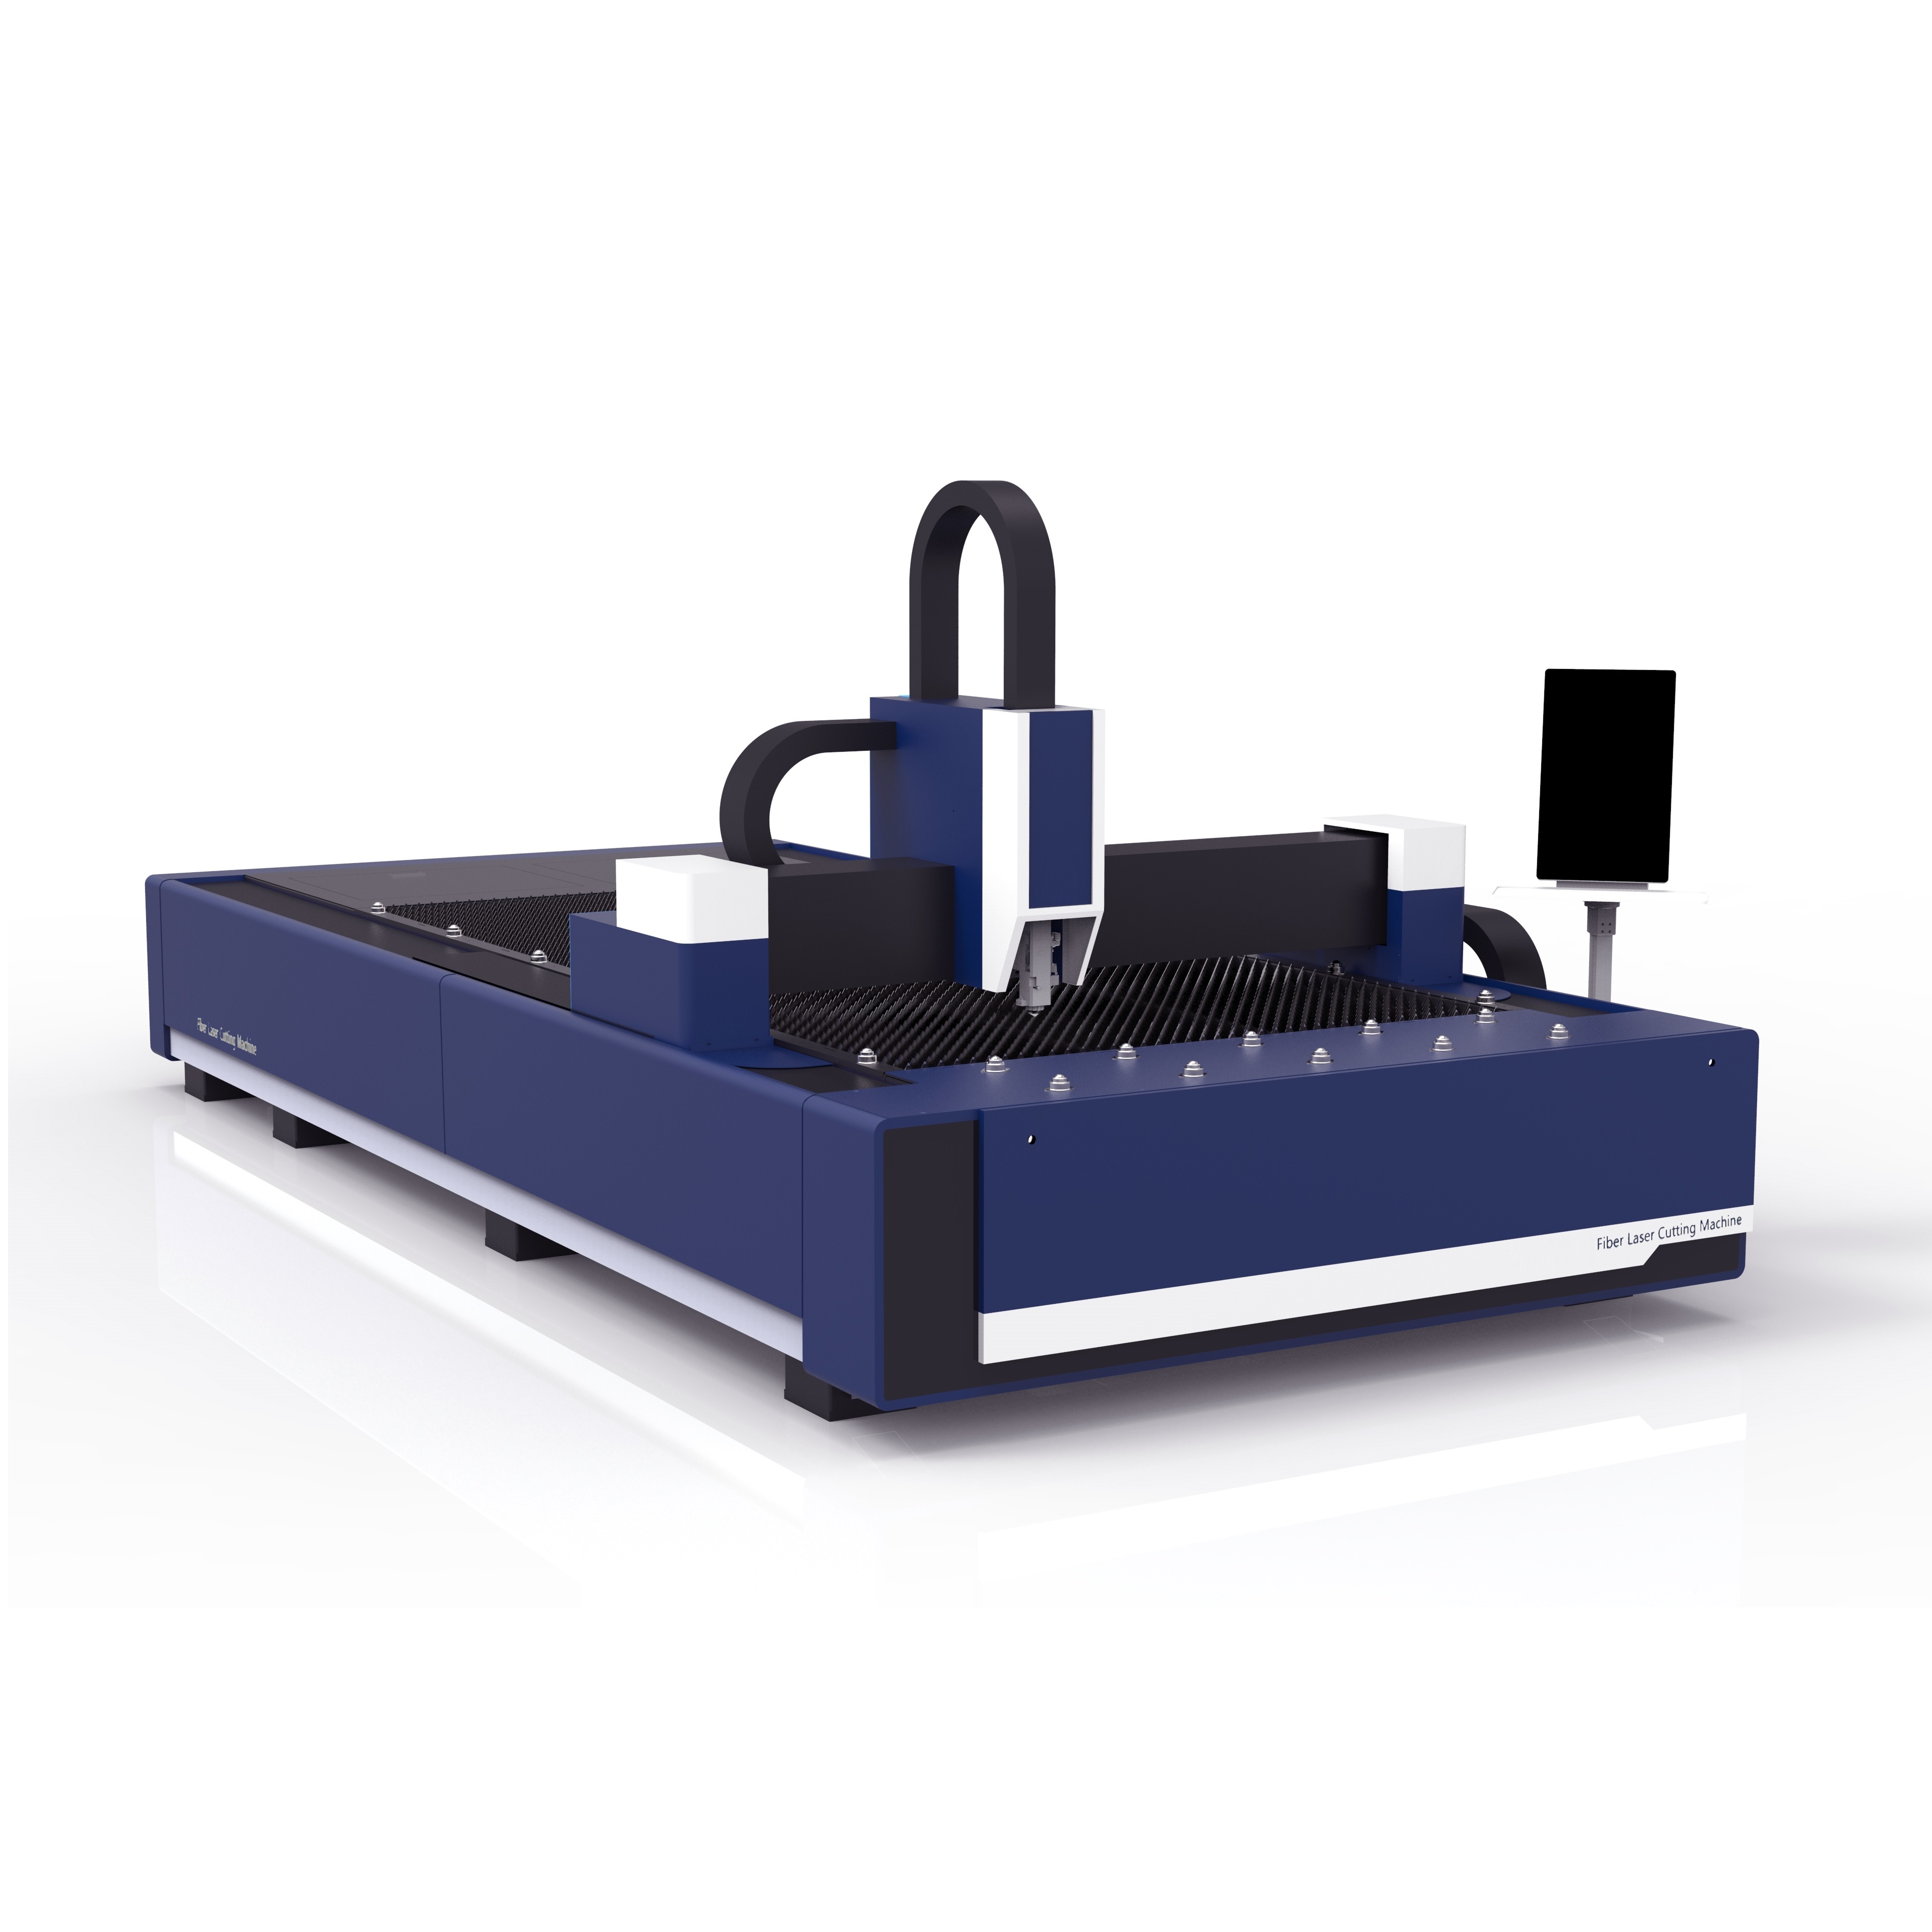 GC1530F Raycus IPG Fiber Laser Metal Cutter Cutting Machine with Cypcut Control System